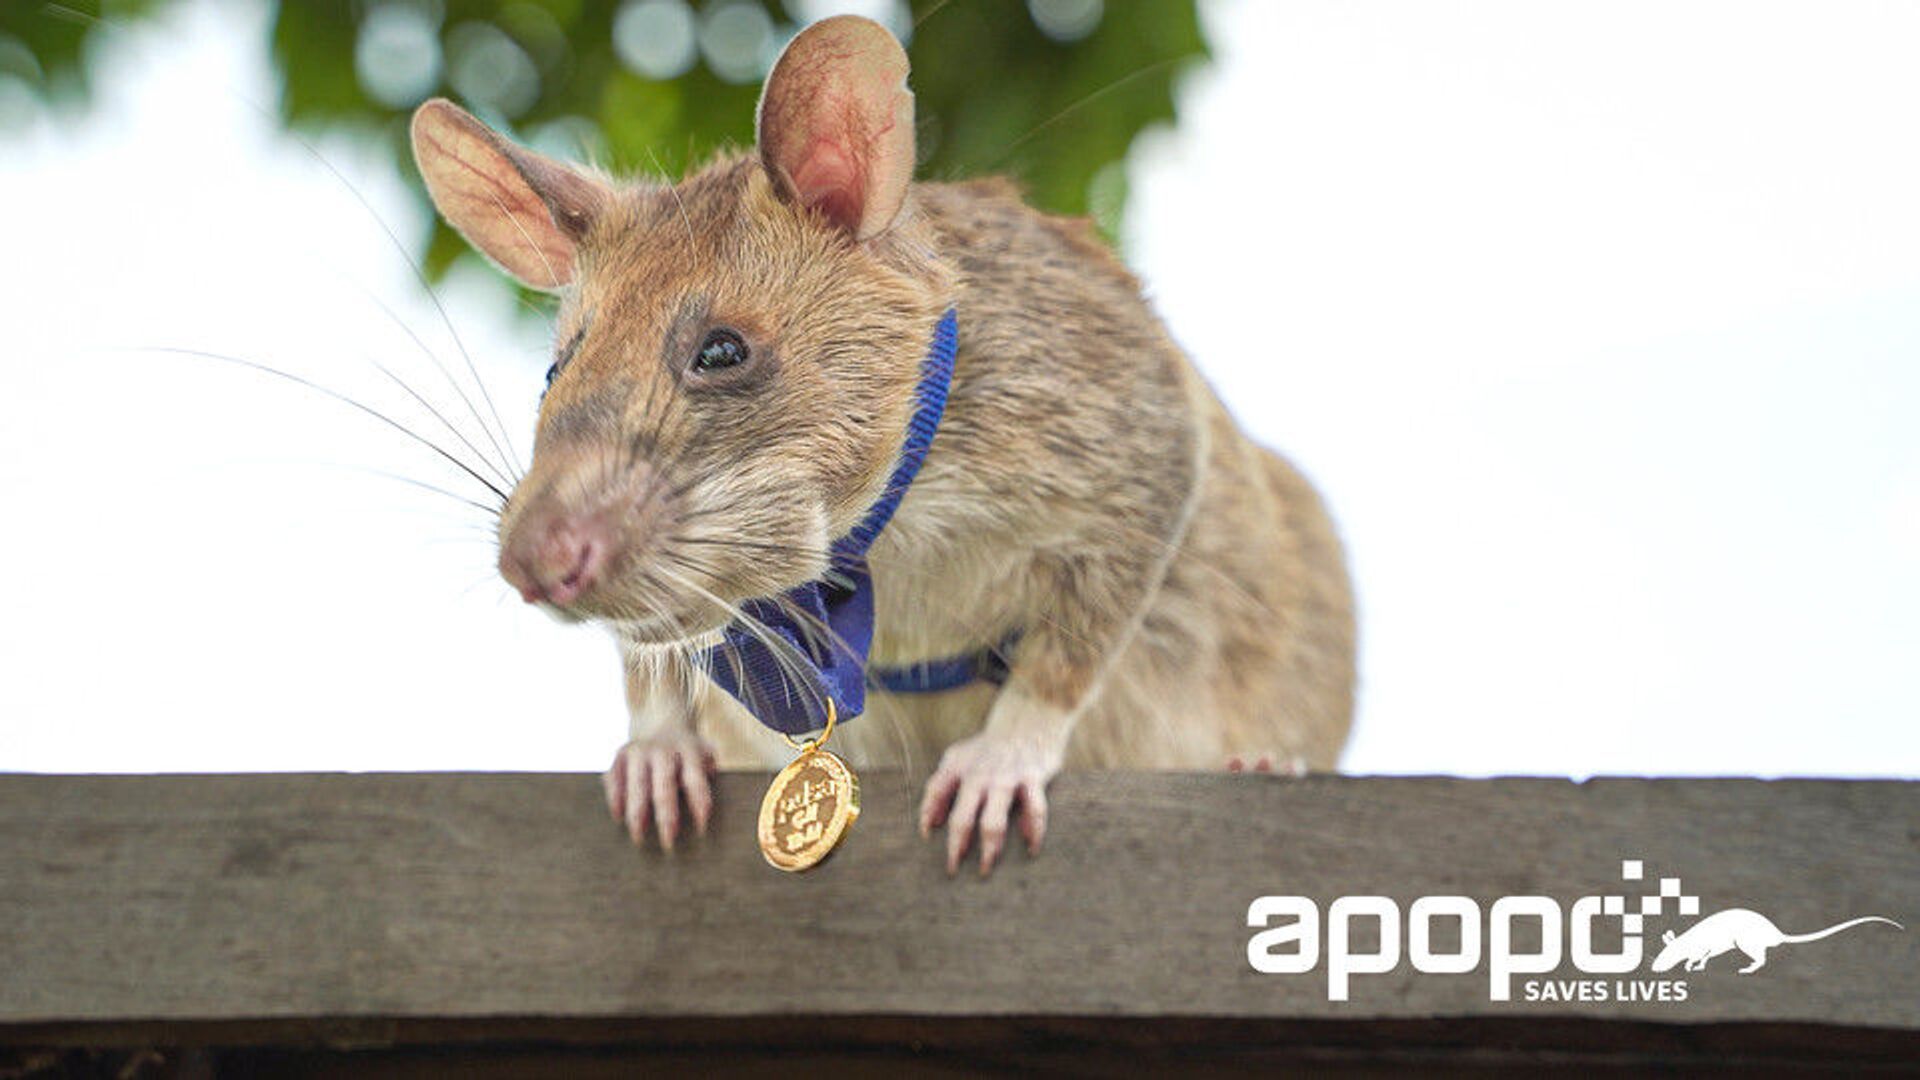 Photo provided by nonprofit APOPO captures Magawa, an African pouch rat, sporting a gold medal he was granted by UK charity People’s Dispensary for Sick Animals, for his efforts in detecting land mines in Cambodia. APOPO has indicated that Magawa has found approximately 71 land mines and 38 unexploded ordnance. - Sputnik International, 1920, 12.01.2022